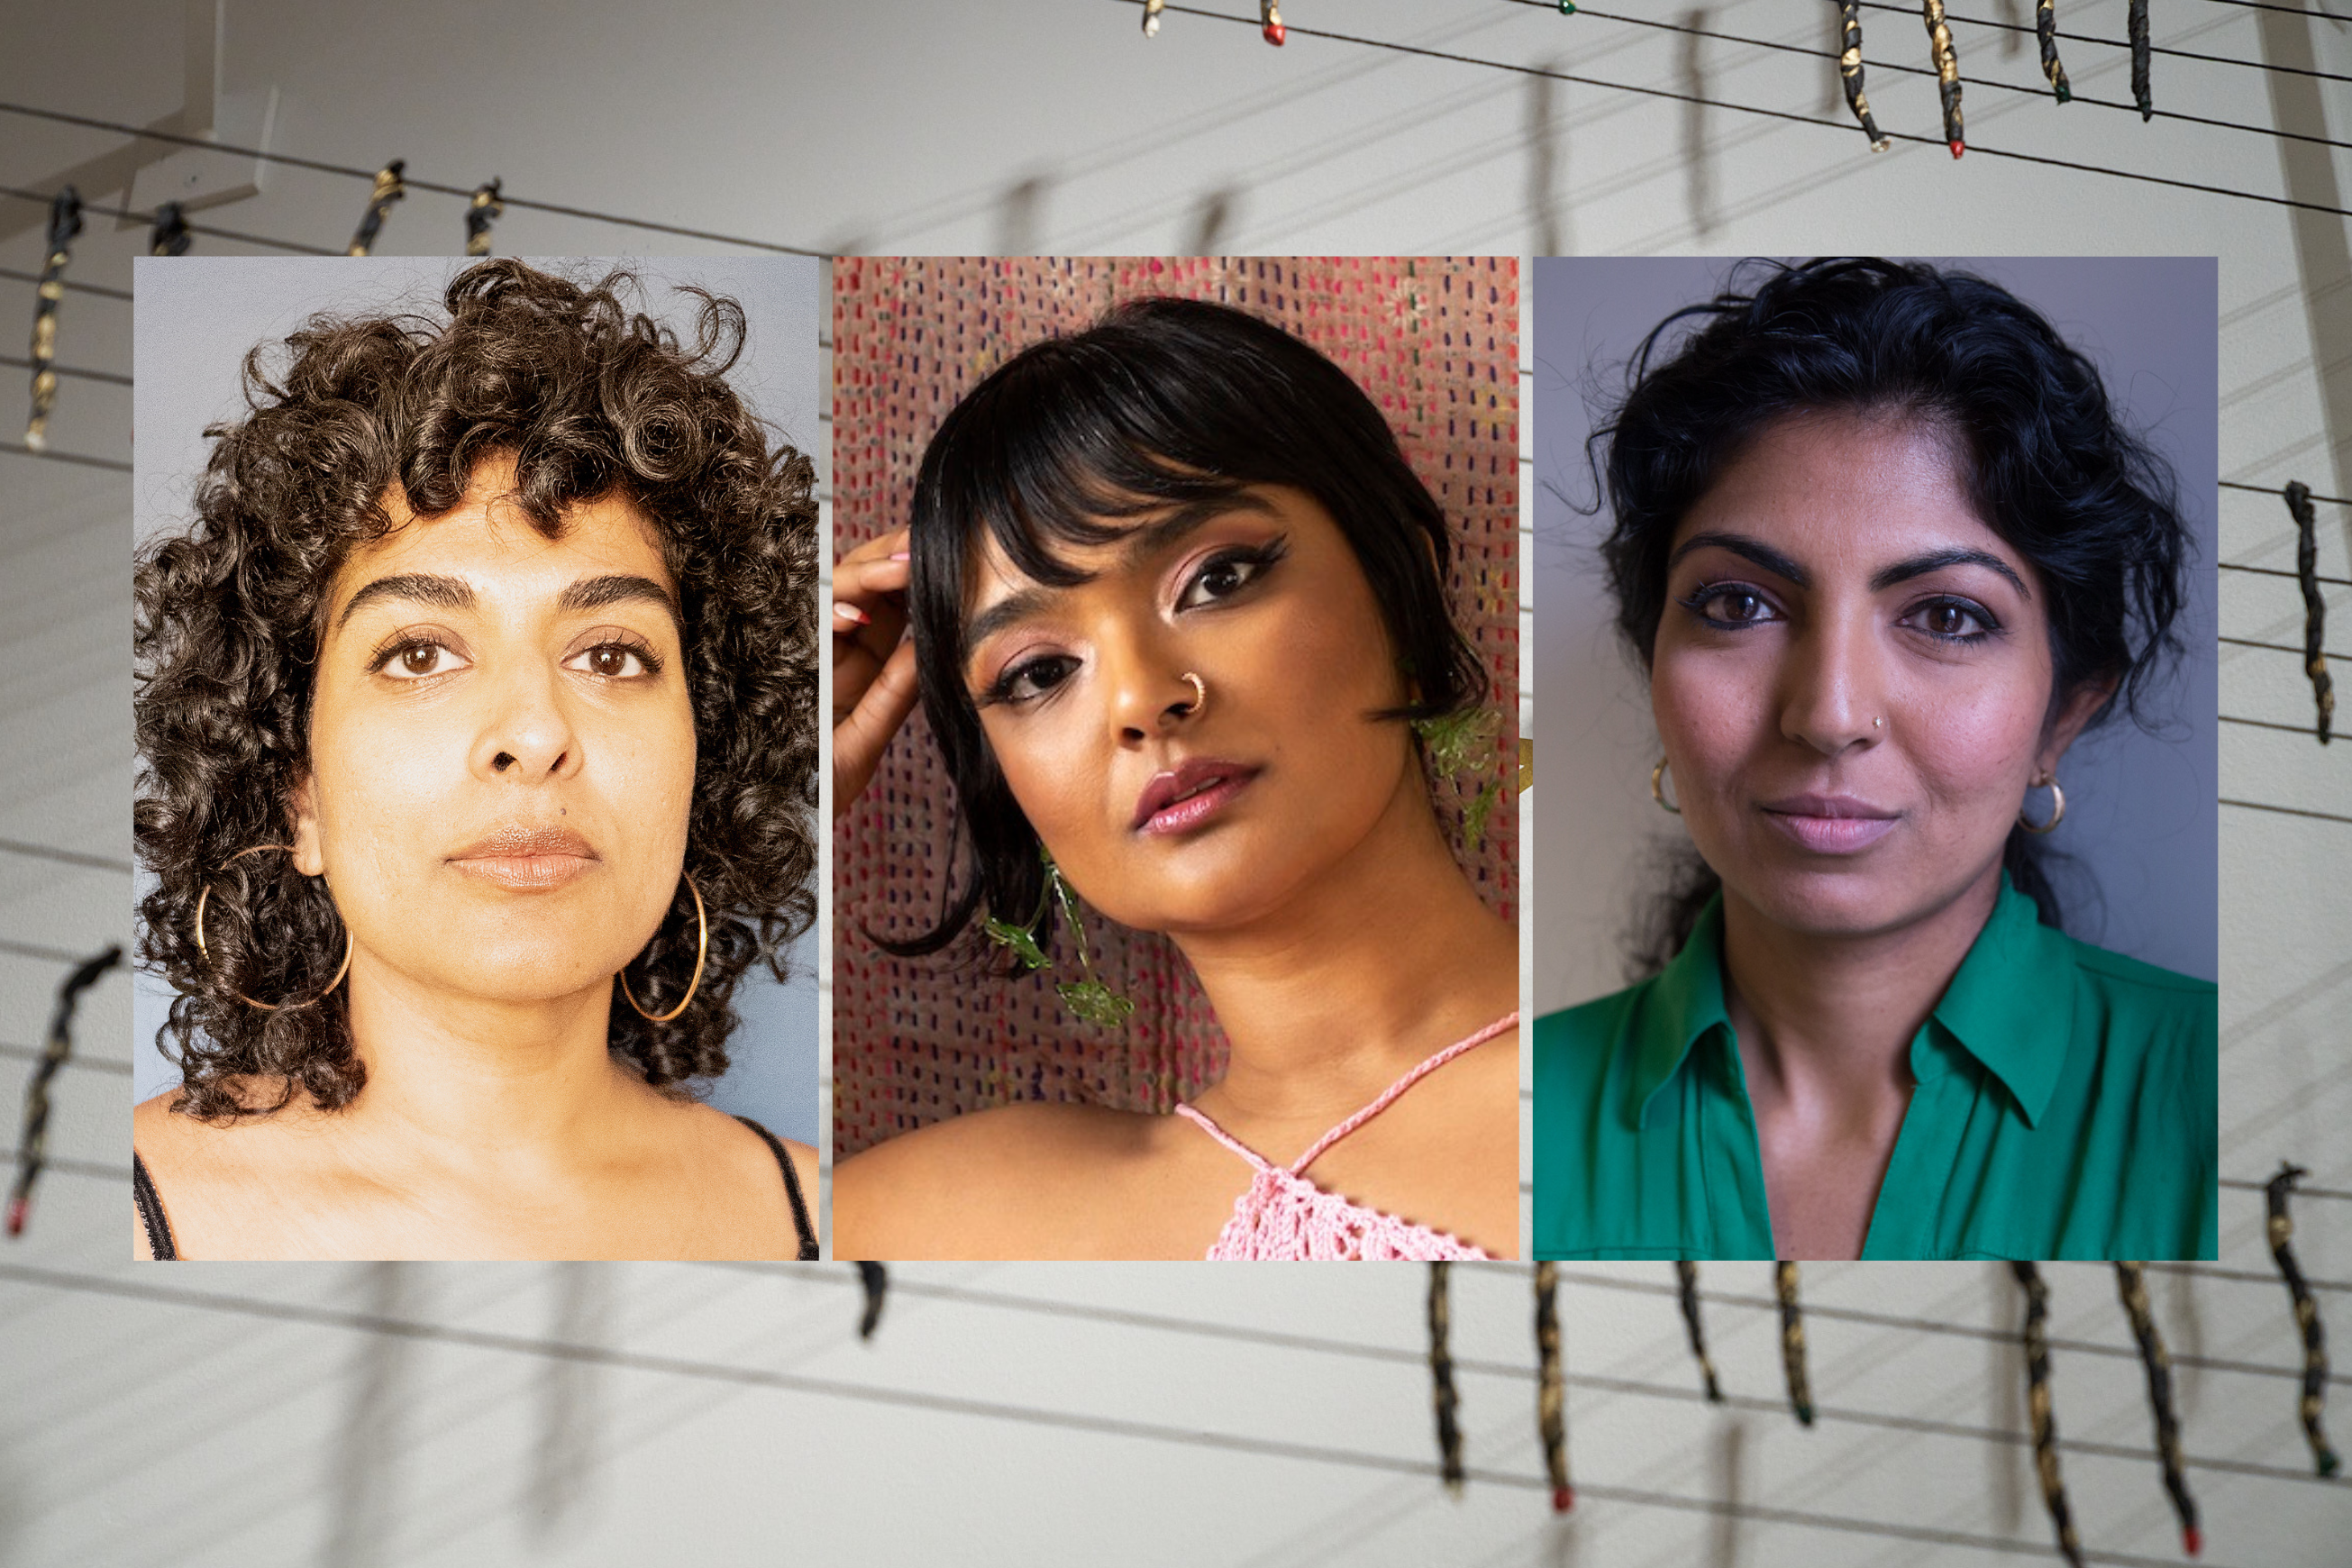 From left to right: headshots of Divya Victor, Tanaïs, and Anjali Kamat